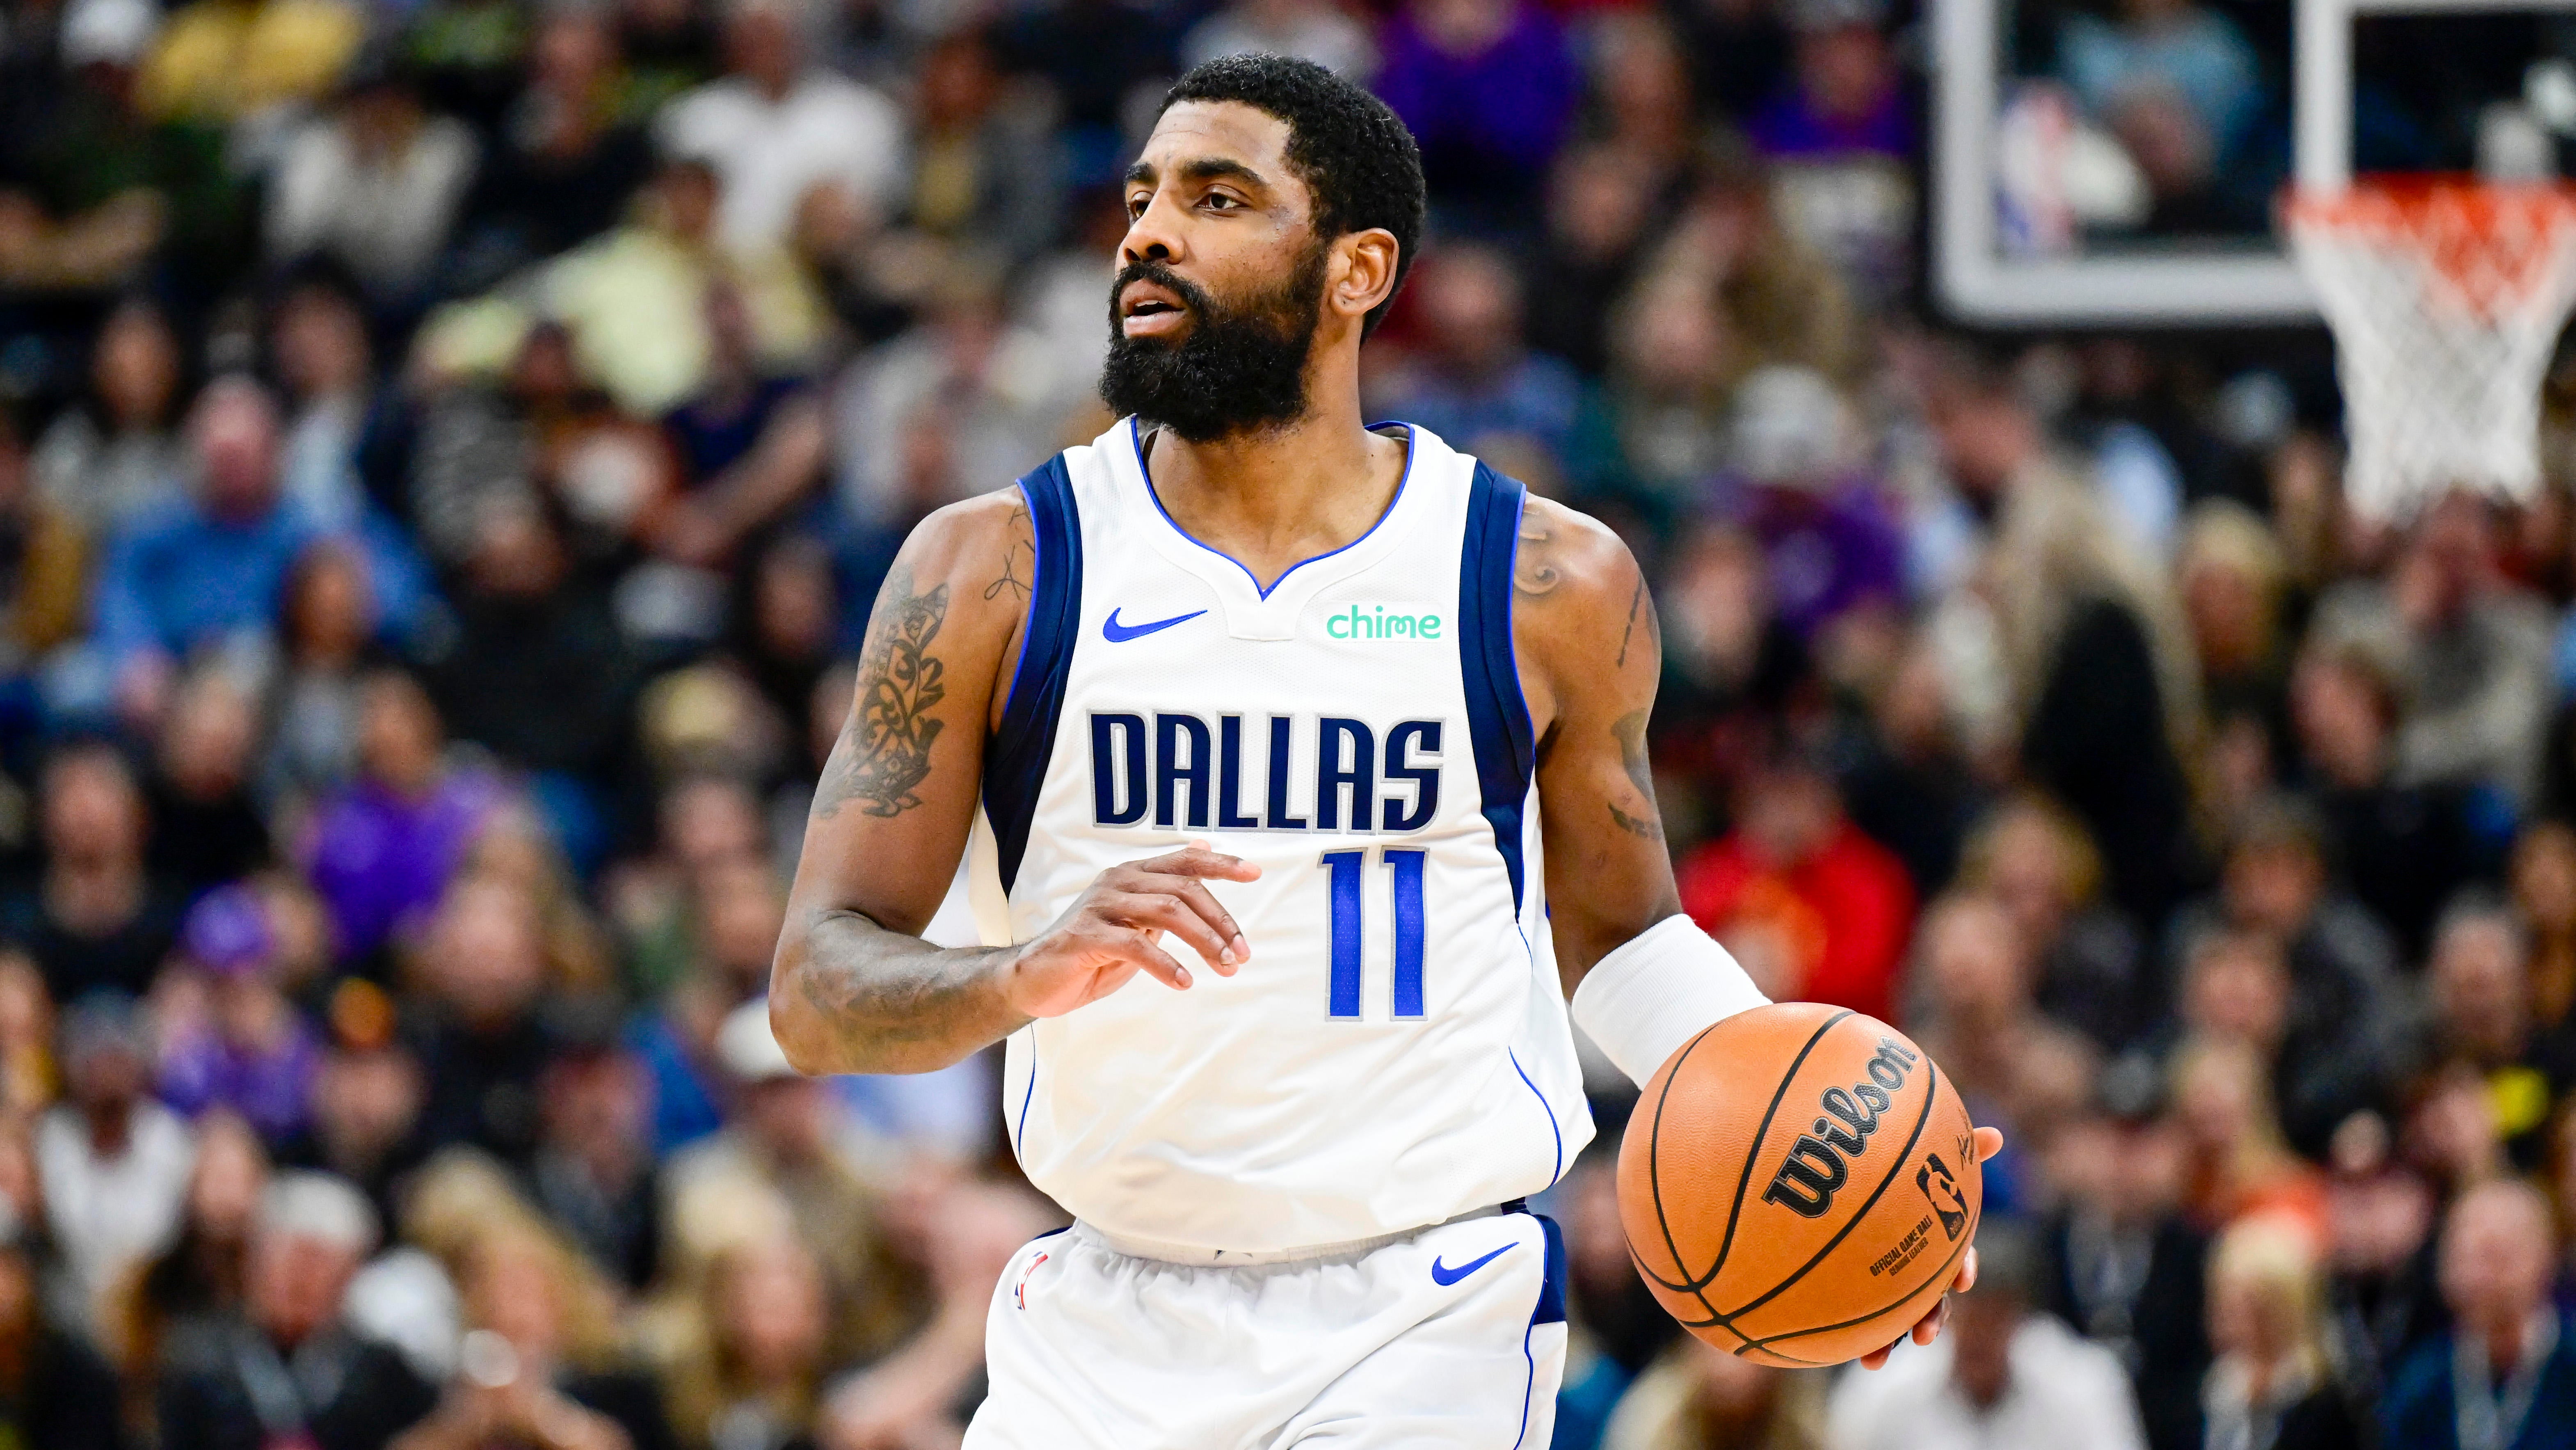 Kyrie Irving says heel injury was 'scary' as he returns to Mavericks team in desperate need of him